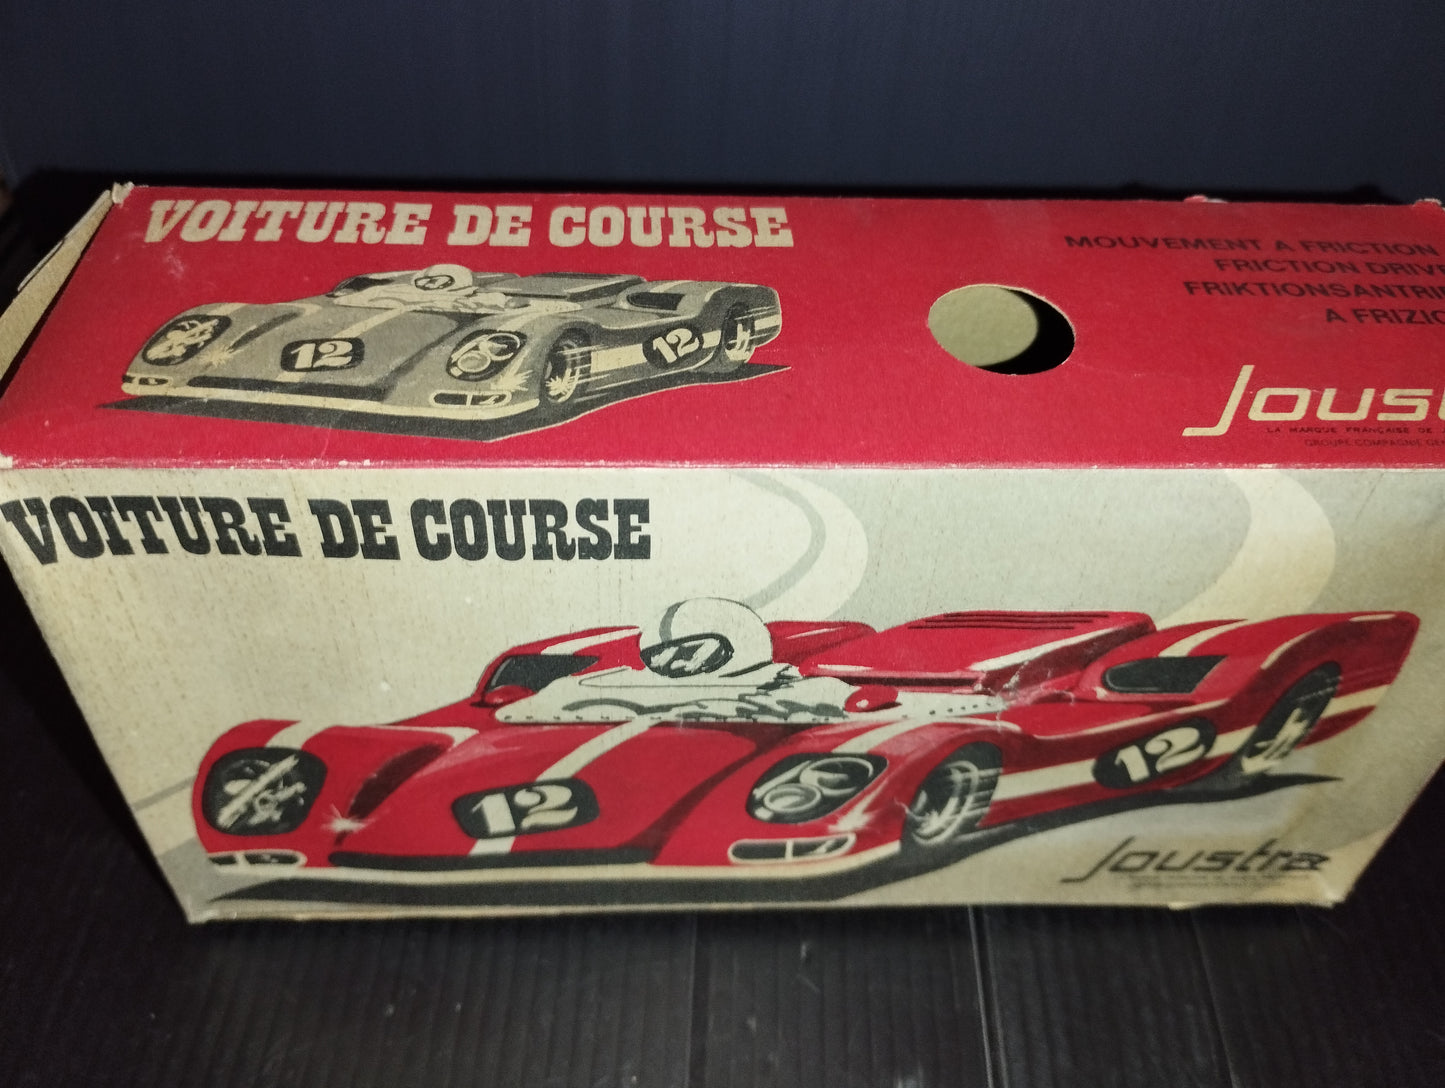 Modello Voiture De Course Joustra Anni 60/70

Made in France